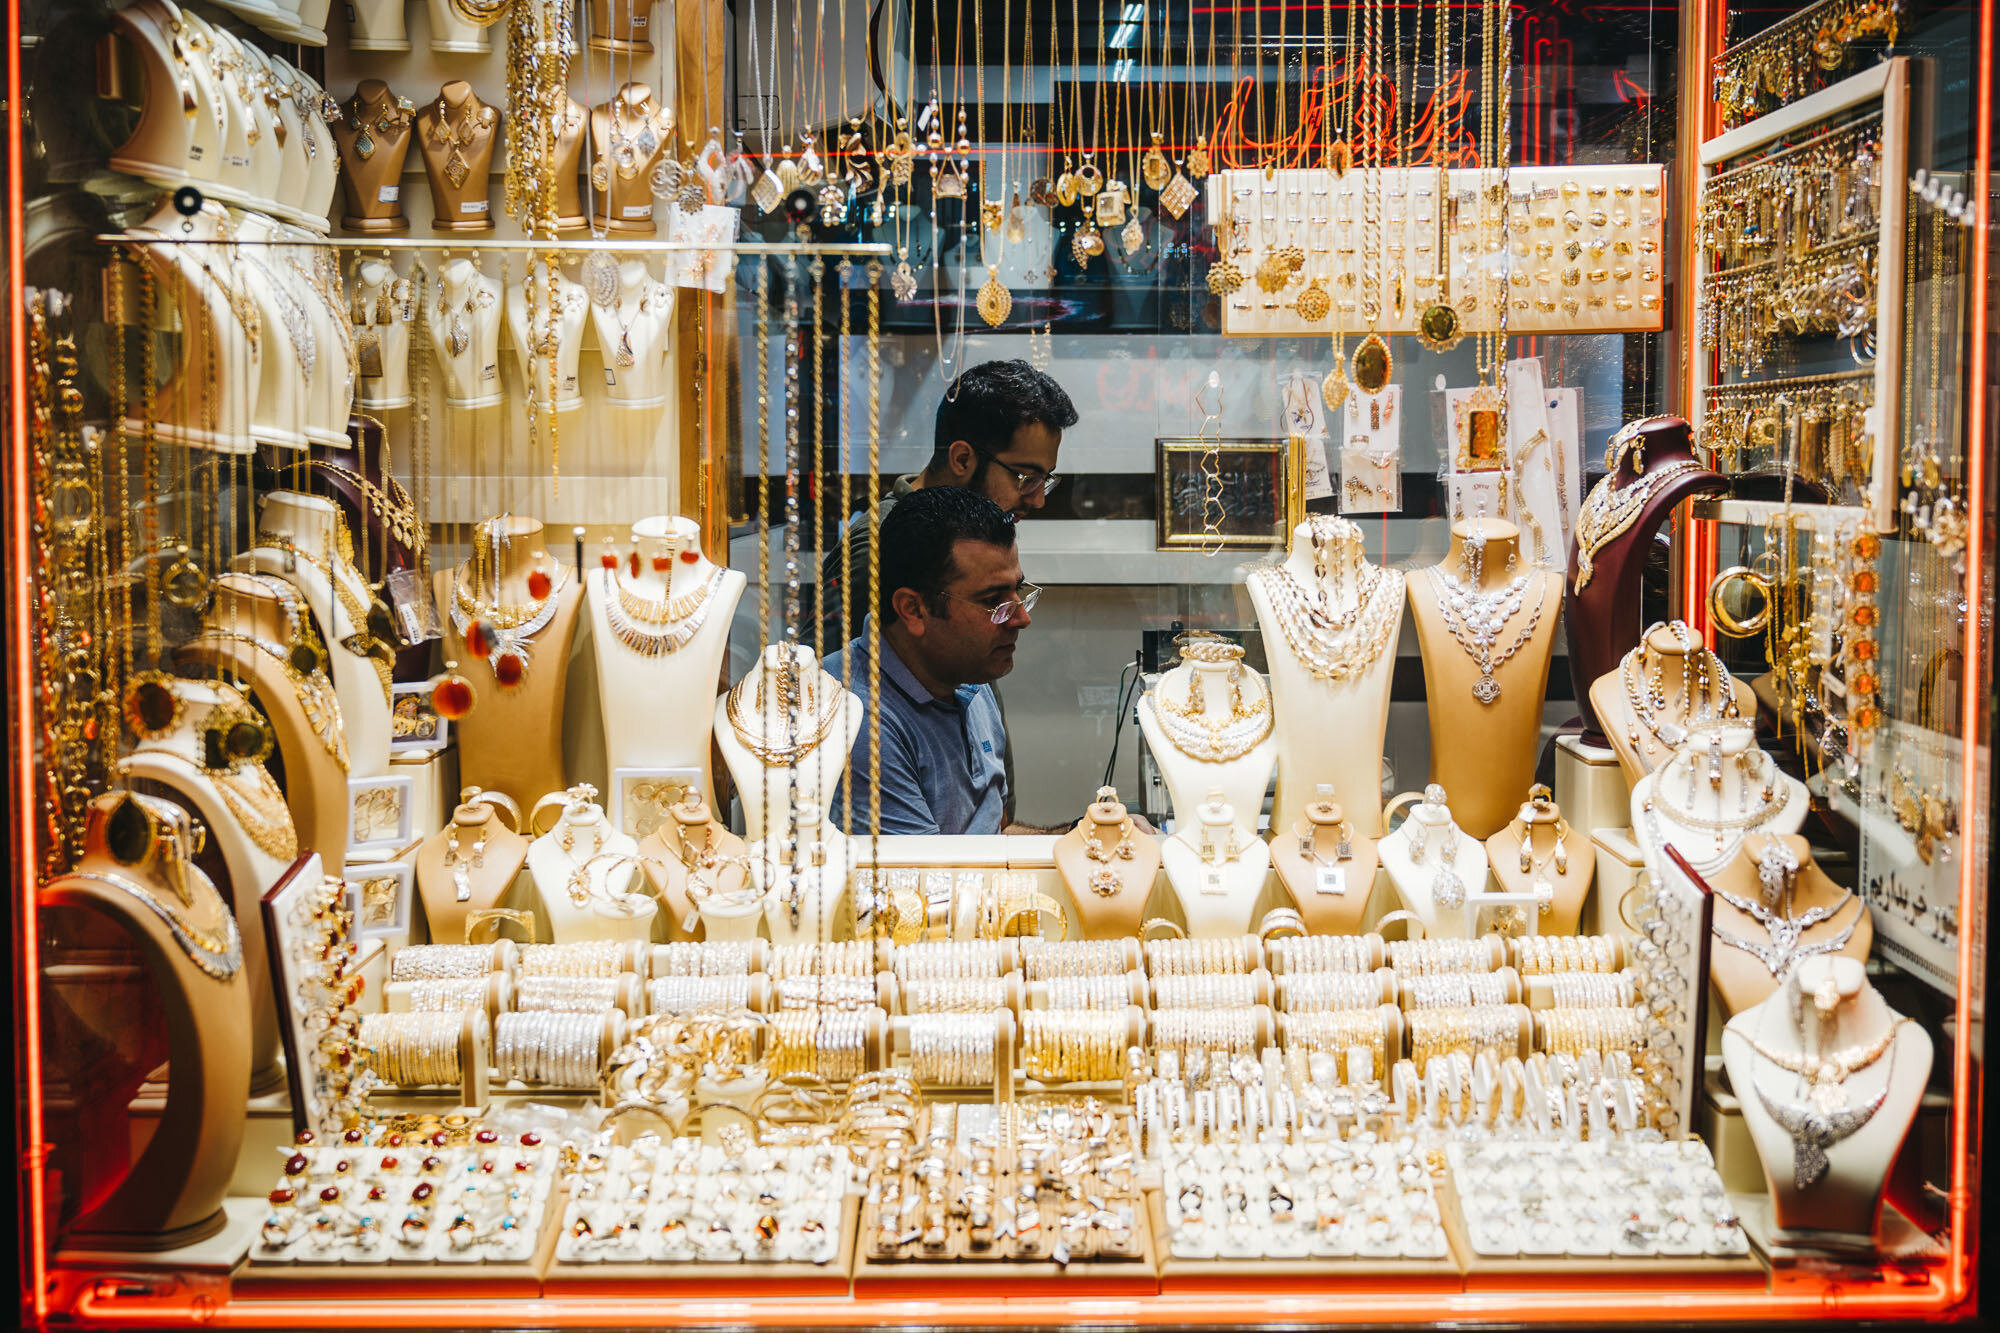  Gold sellers in the gold department of the bazaar 